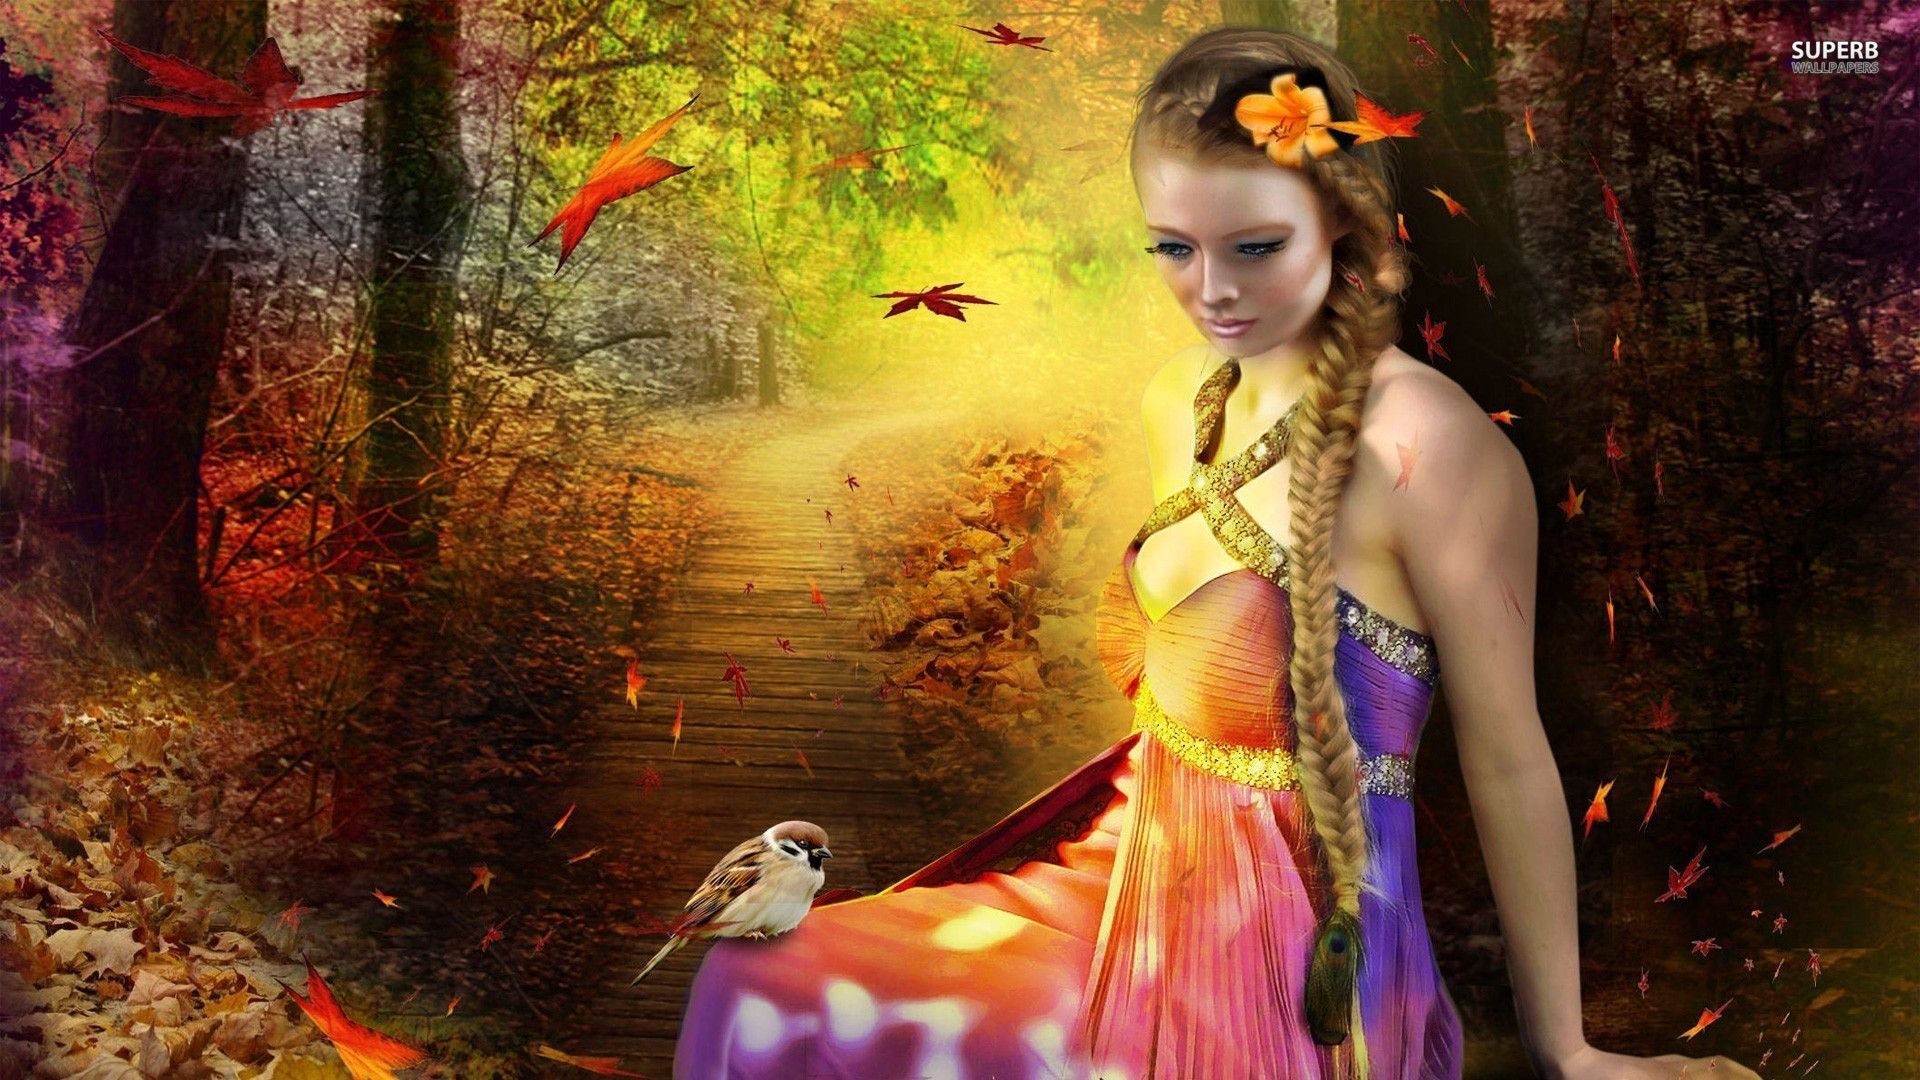 Forest fairy wallpaper - Fantasy wallpapers -